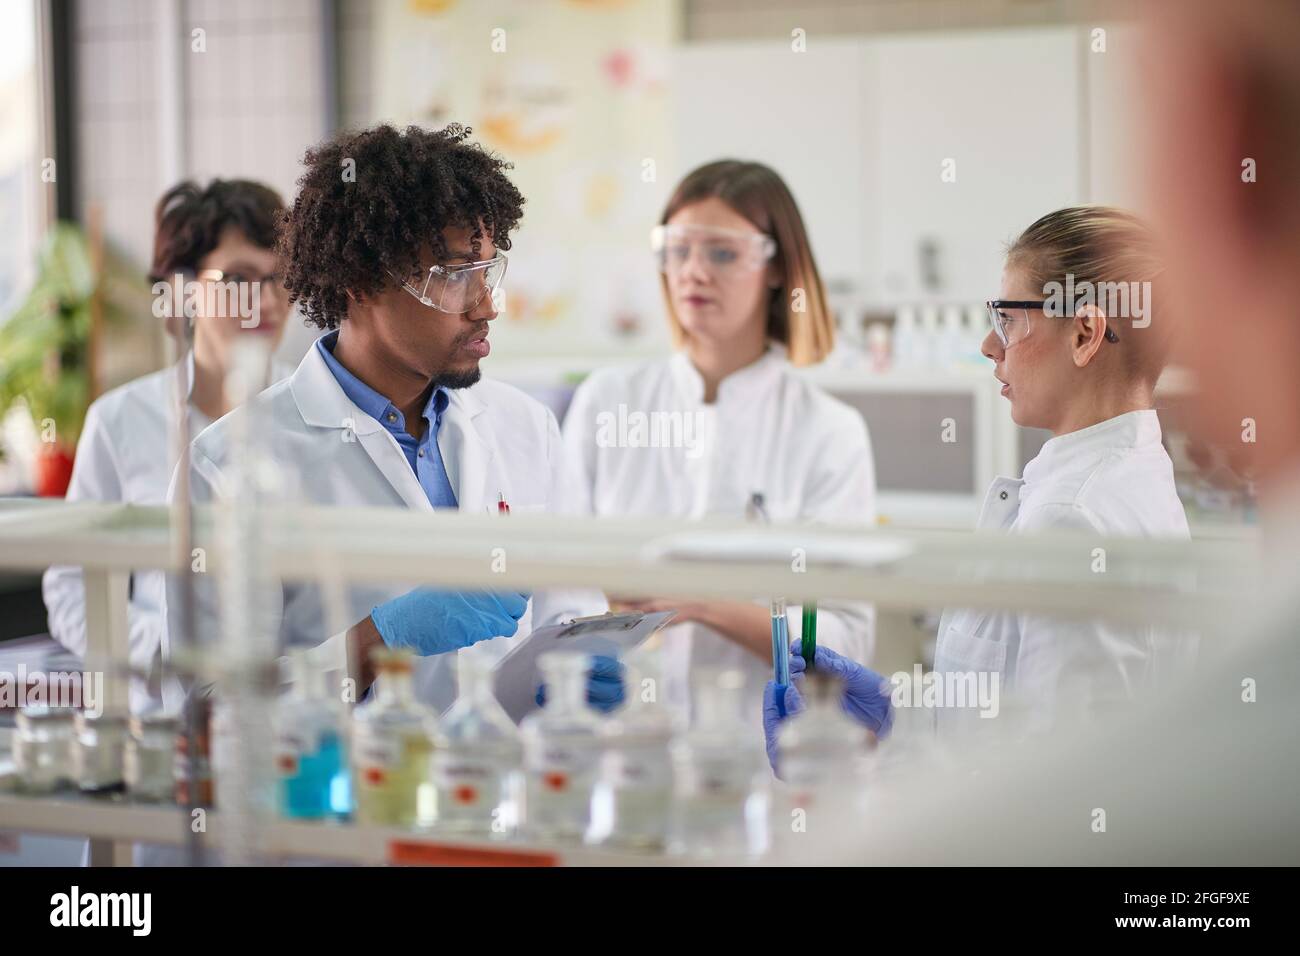 Young students discussing about the experiment in a sterile environment of the laboratory. Science, chemicals, lab, people Stock Photo